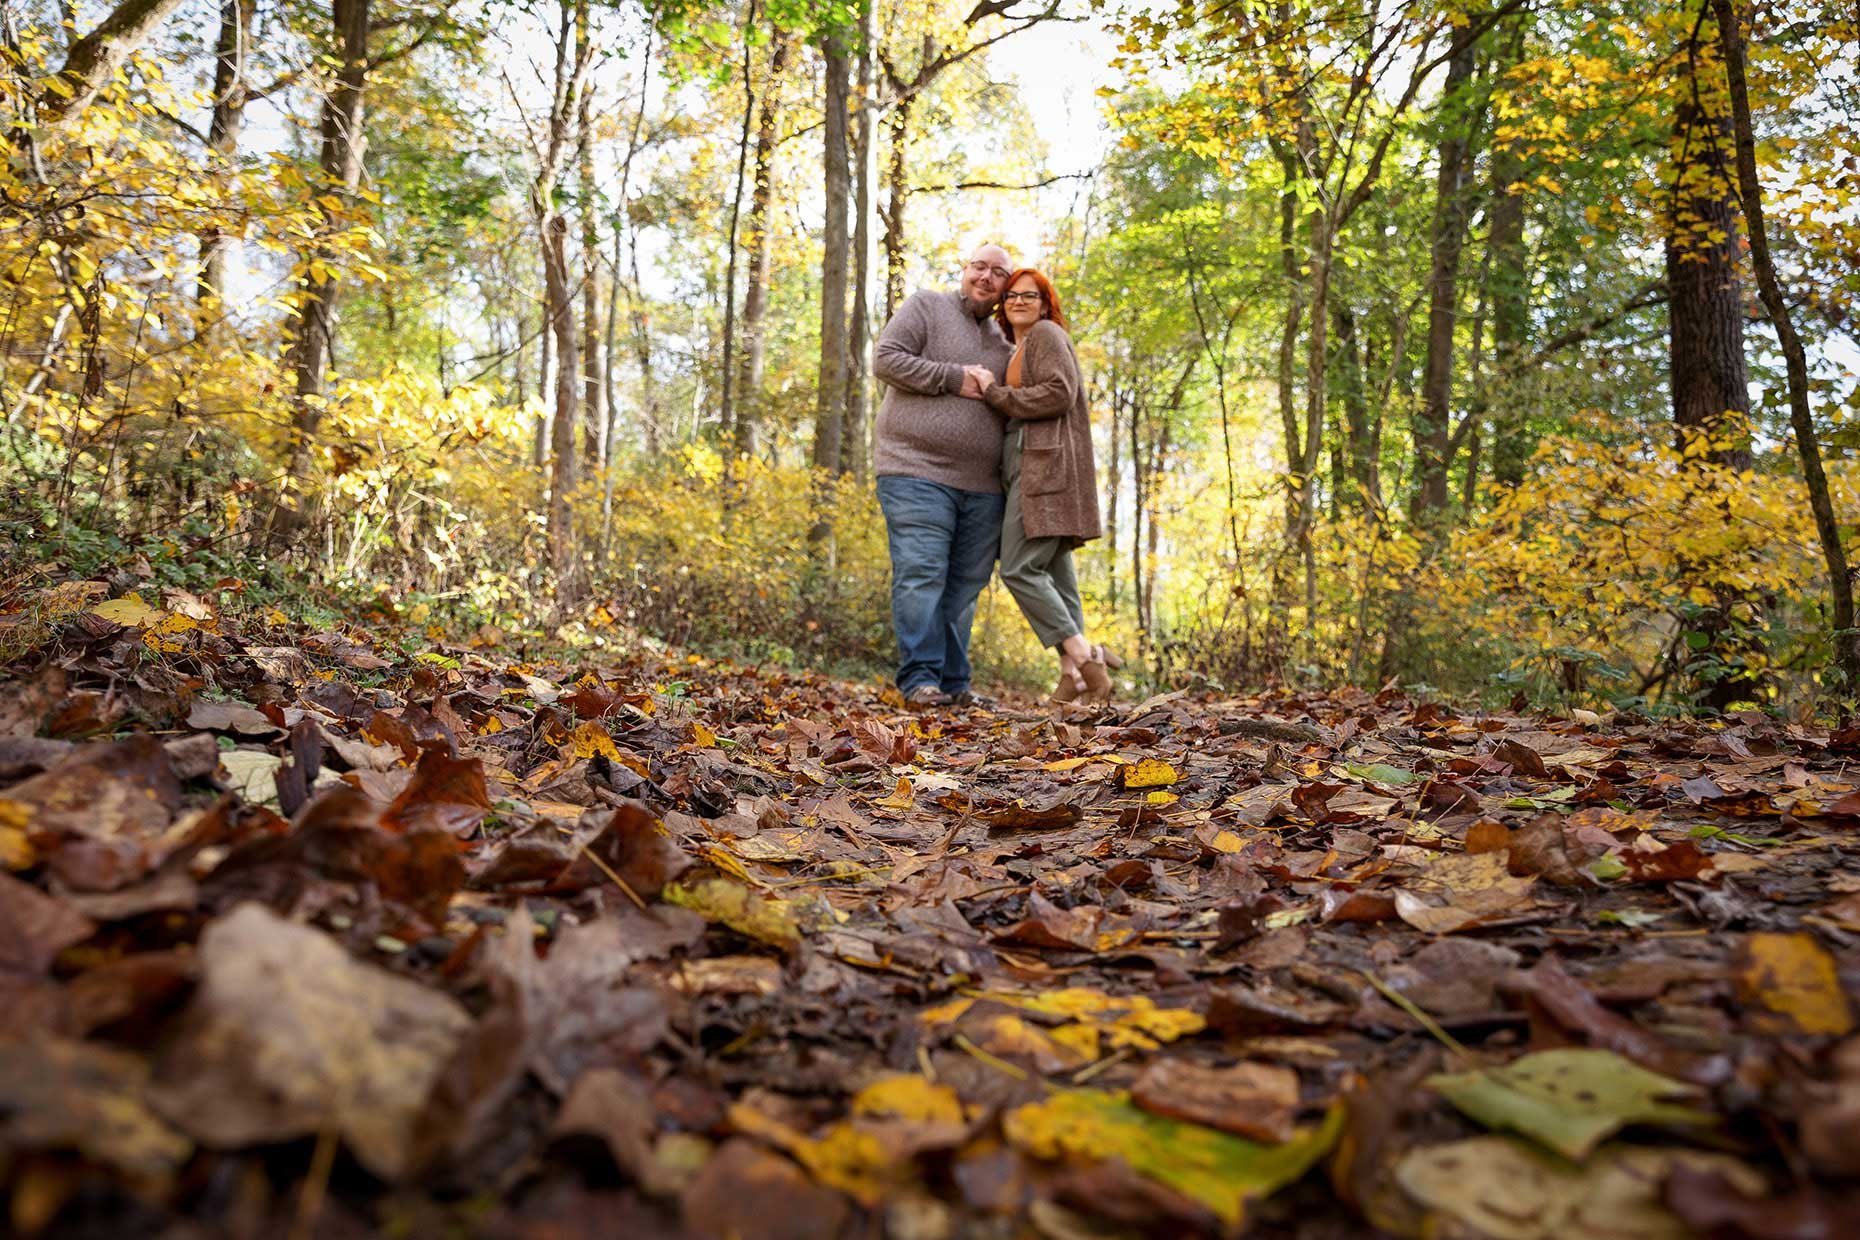 Engagement Photos with fall leaves